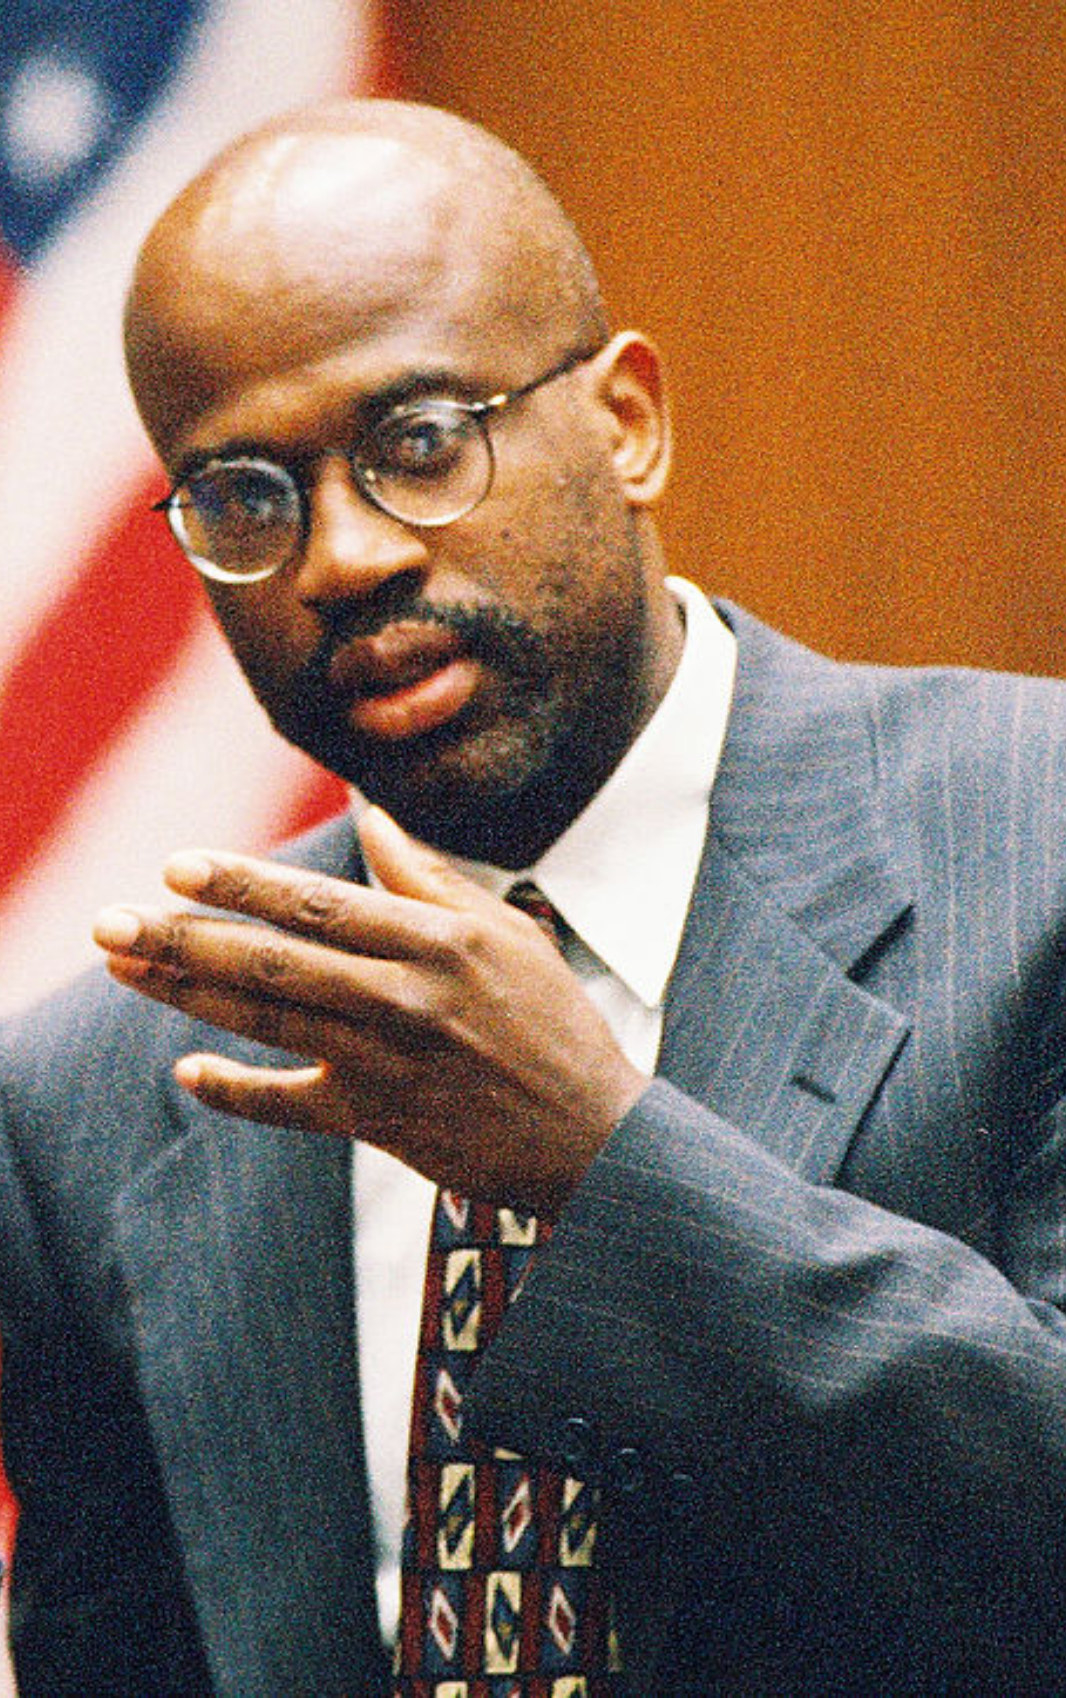 Christopher Darden confer during testimony in the O.J. Simpson murder trial, 1995